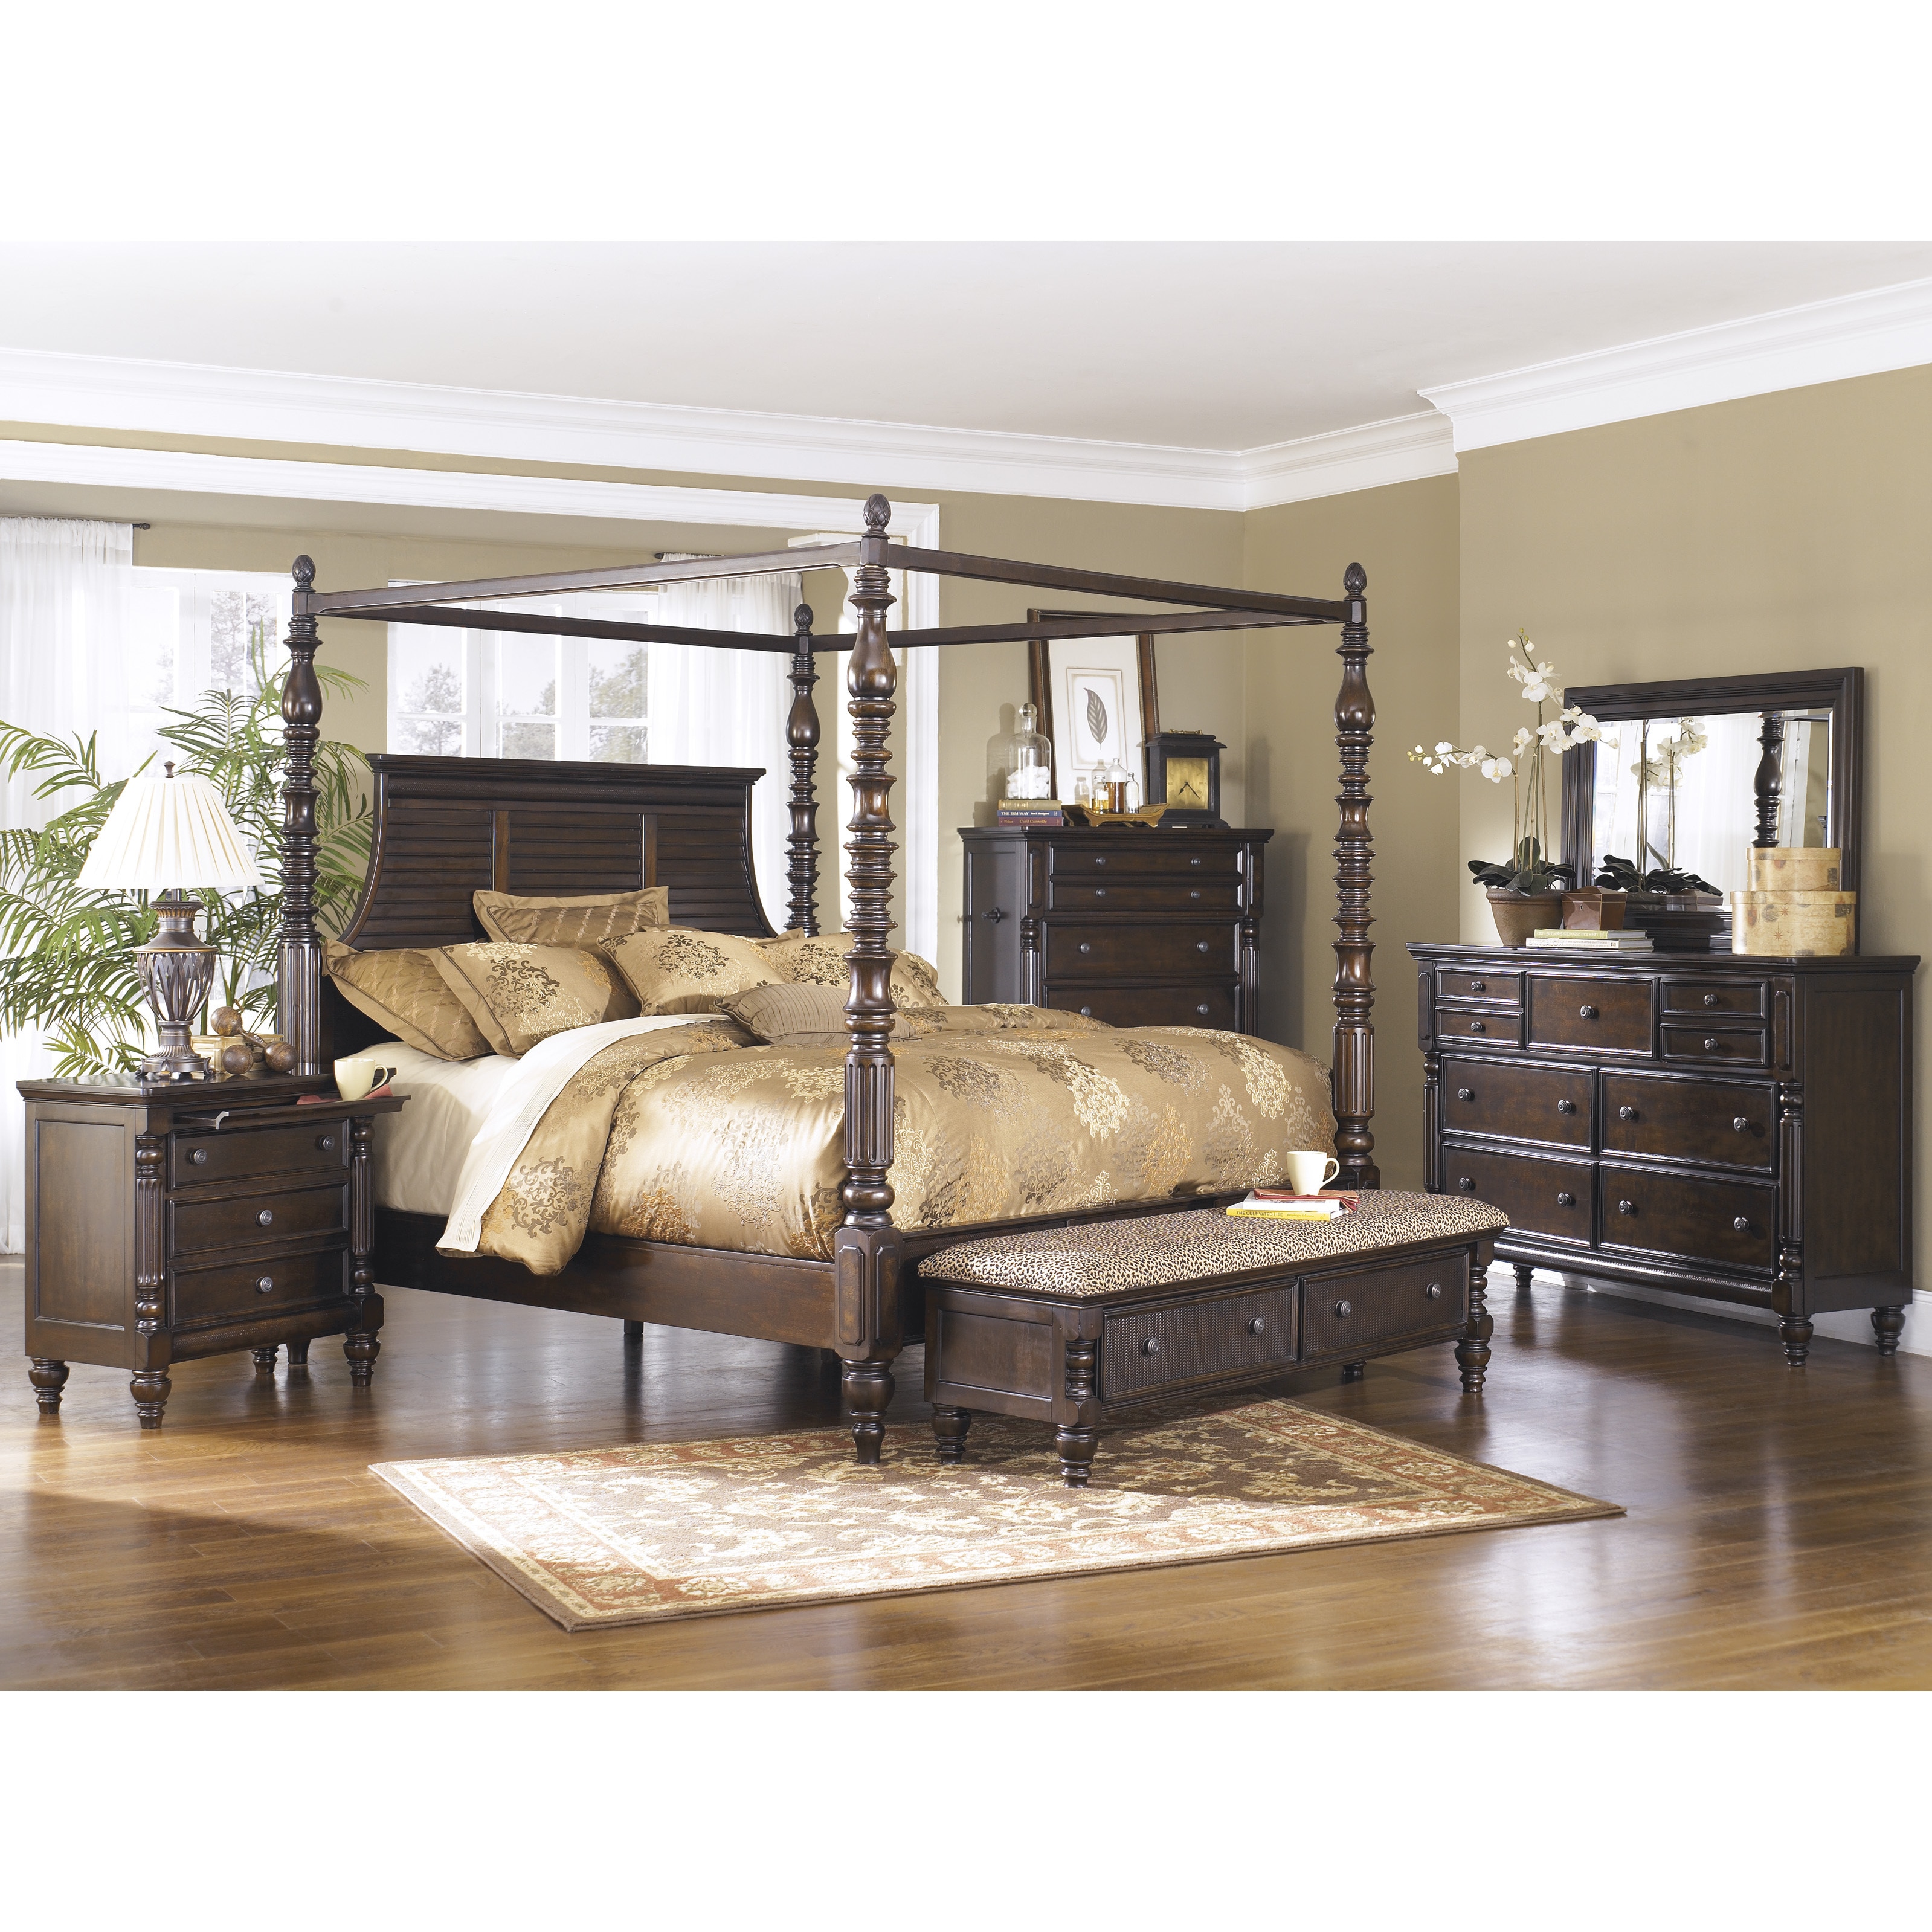 Shop Signature Design By Ashley Key Town Dark Brown Canopy Bed